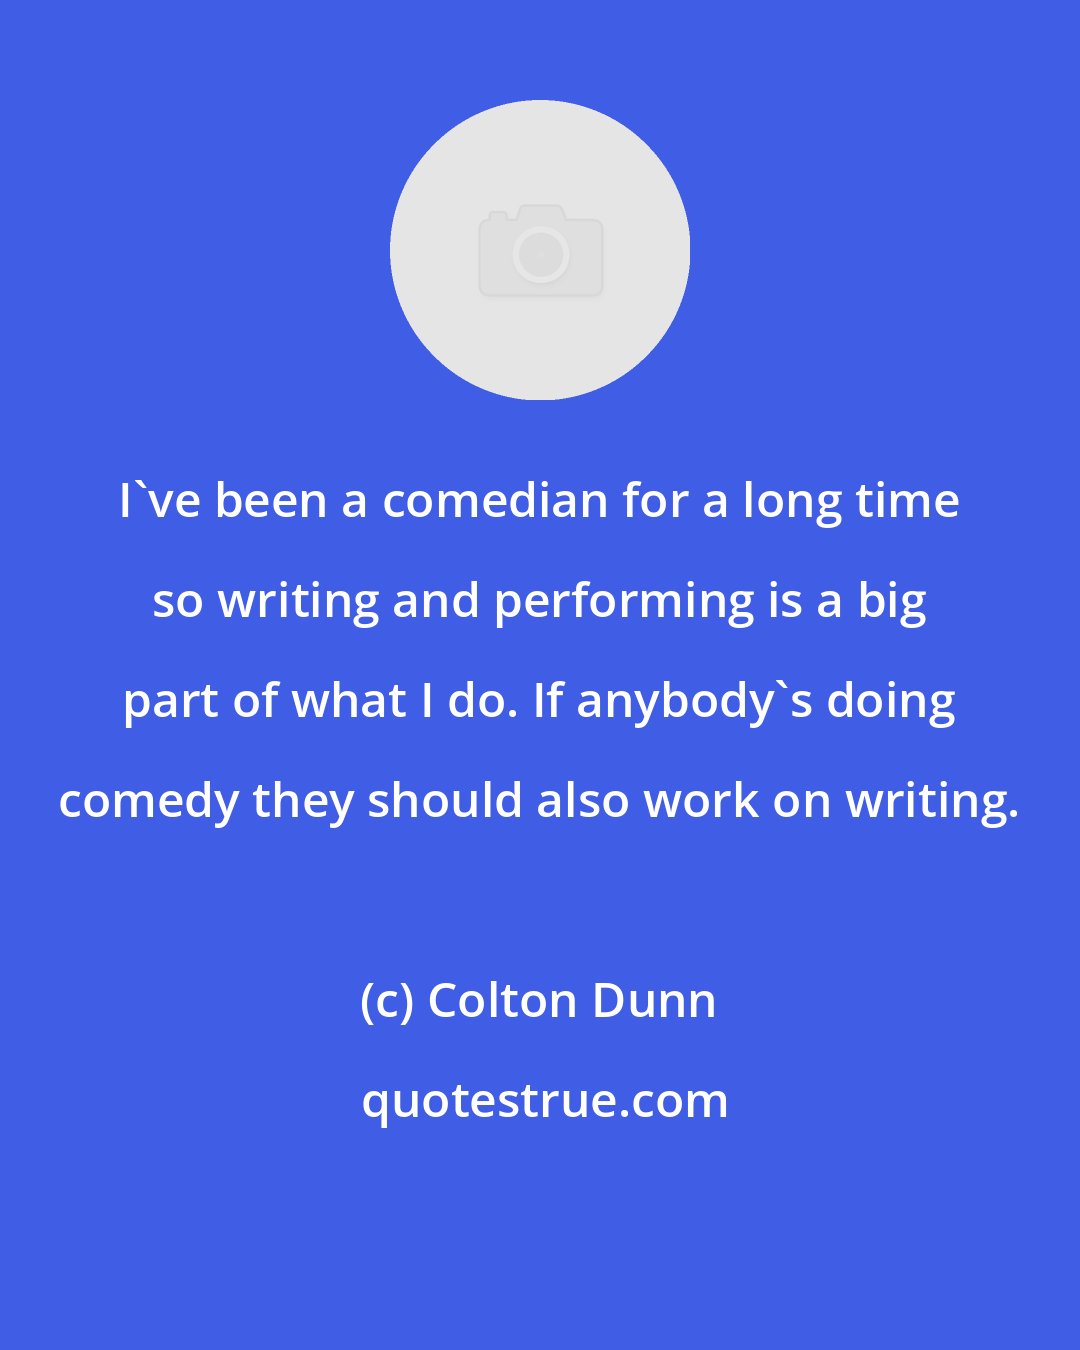 Colton Dunn: I've been a comedian for a long time so writing and performing is a big part of what I do. If anybody's doing comedy they should also work on writing.